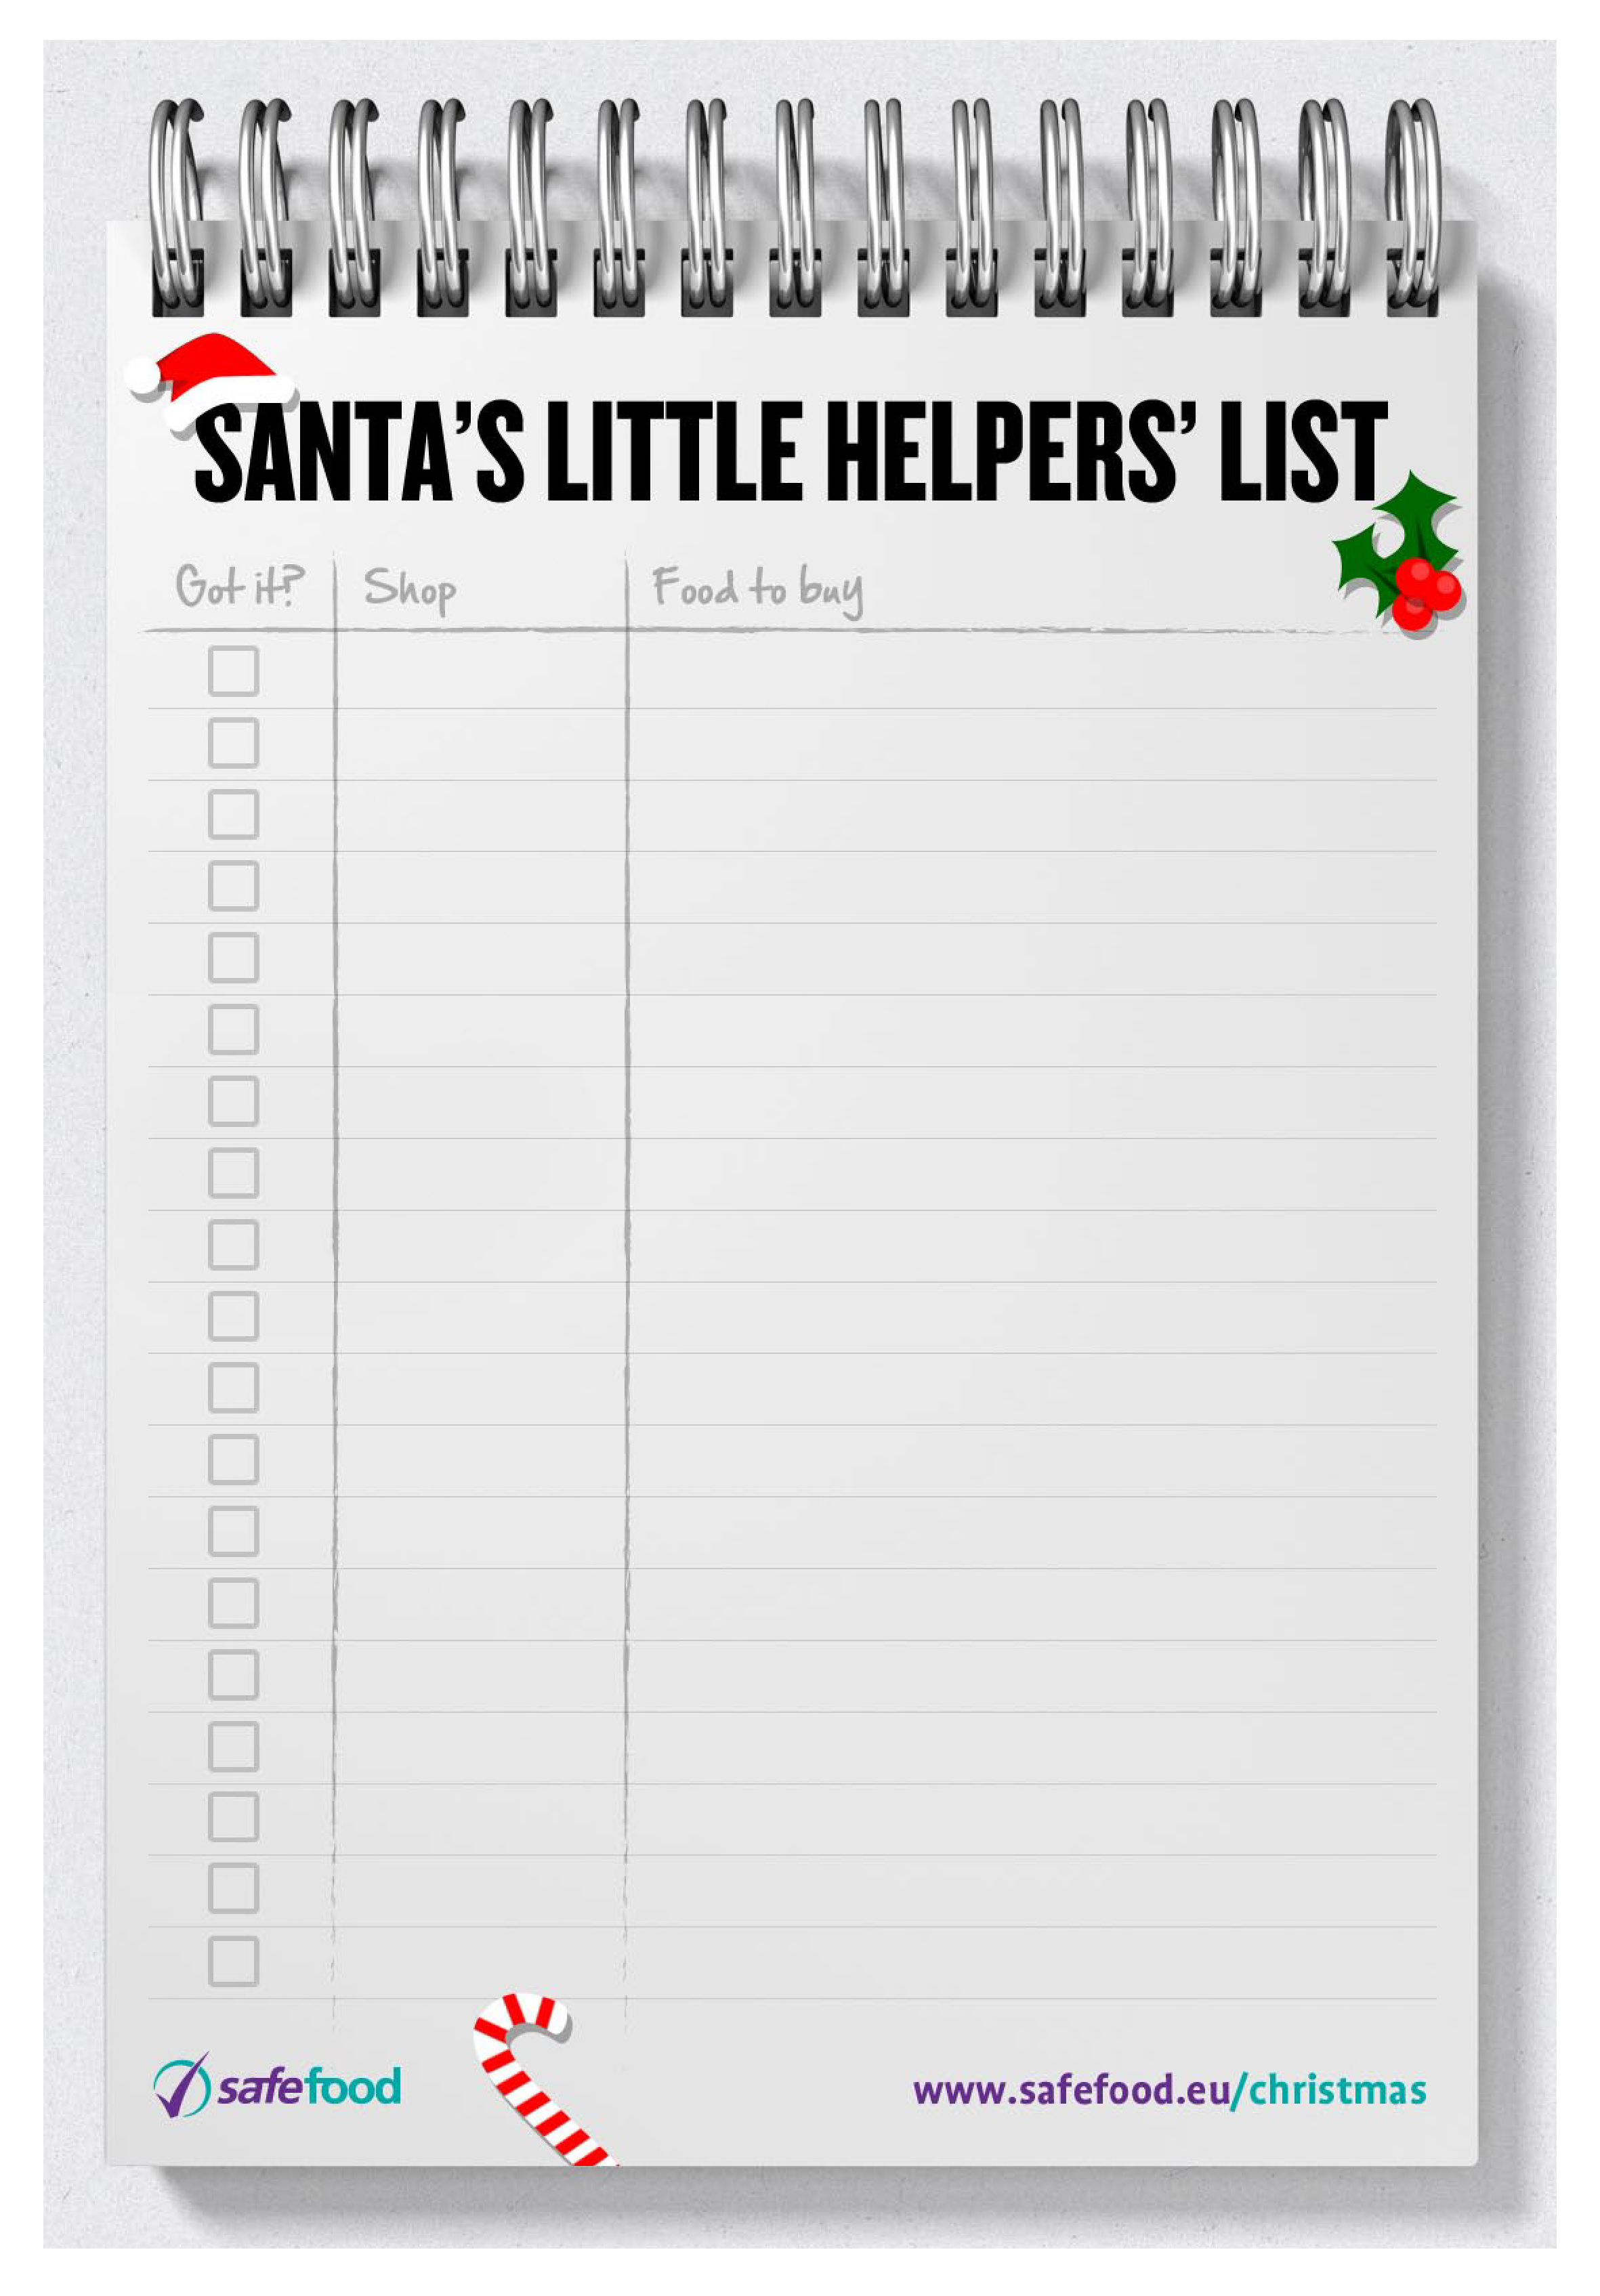 Christmas Food Shopping List Templates At Allbusinesstemplates